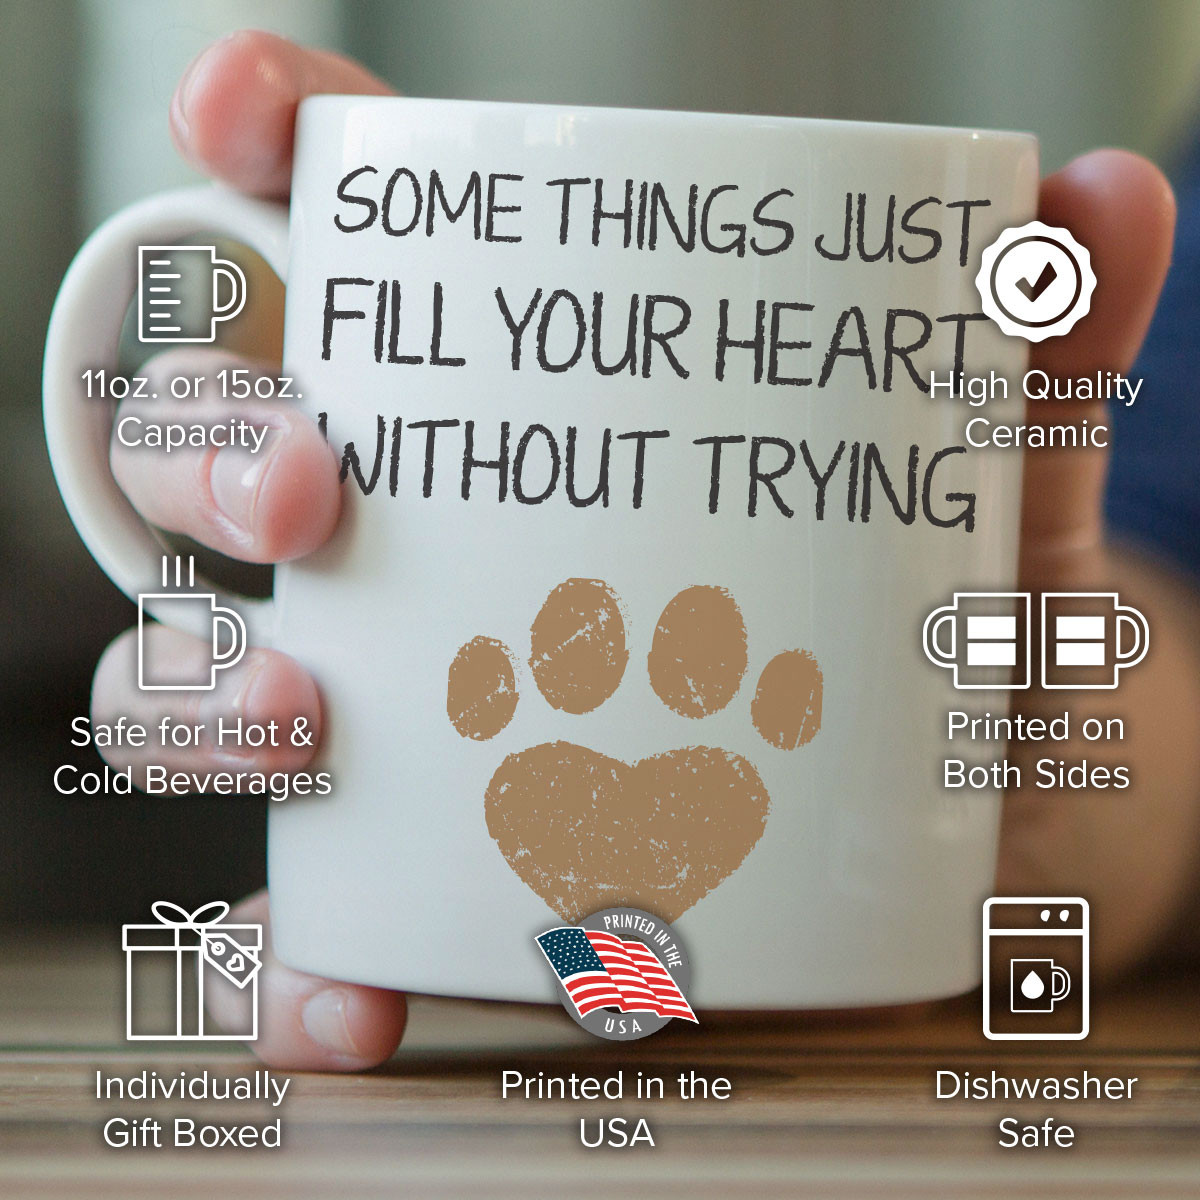 "Some Things That Fill Your Heart Without Trying" Mug